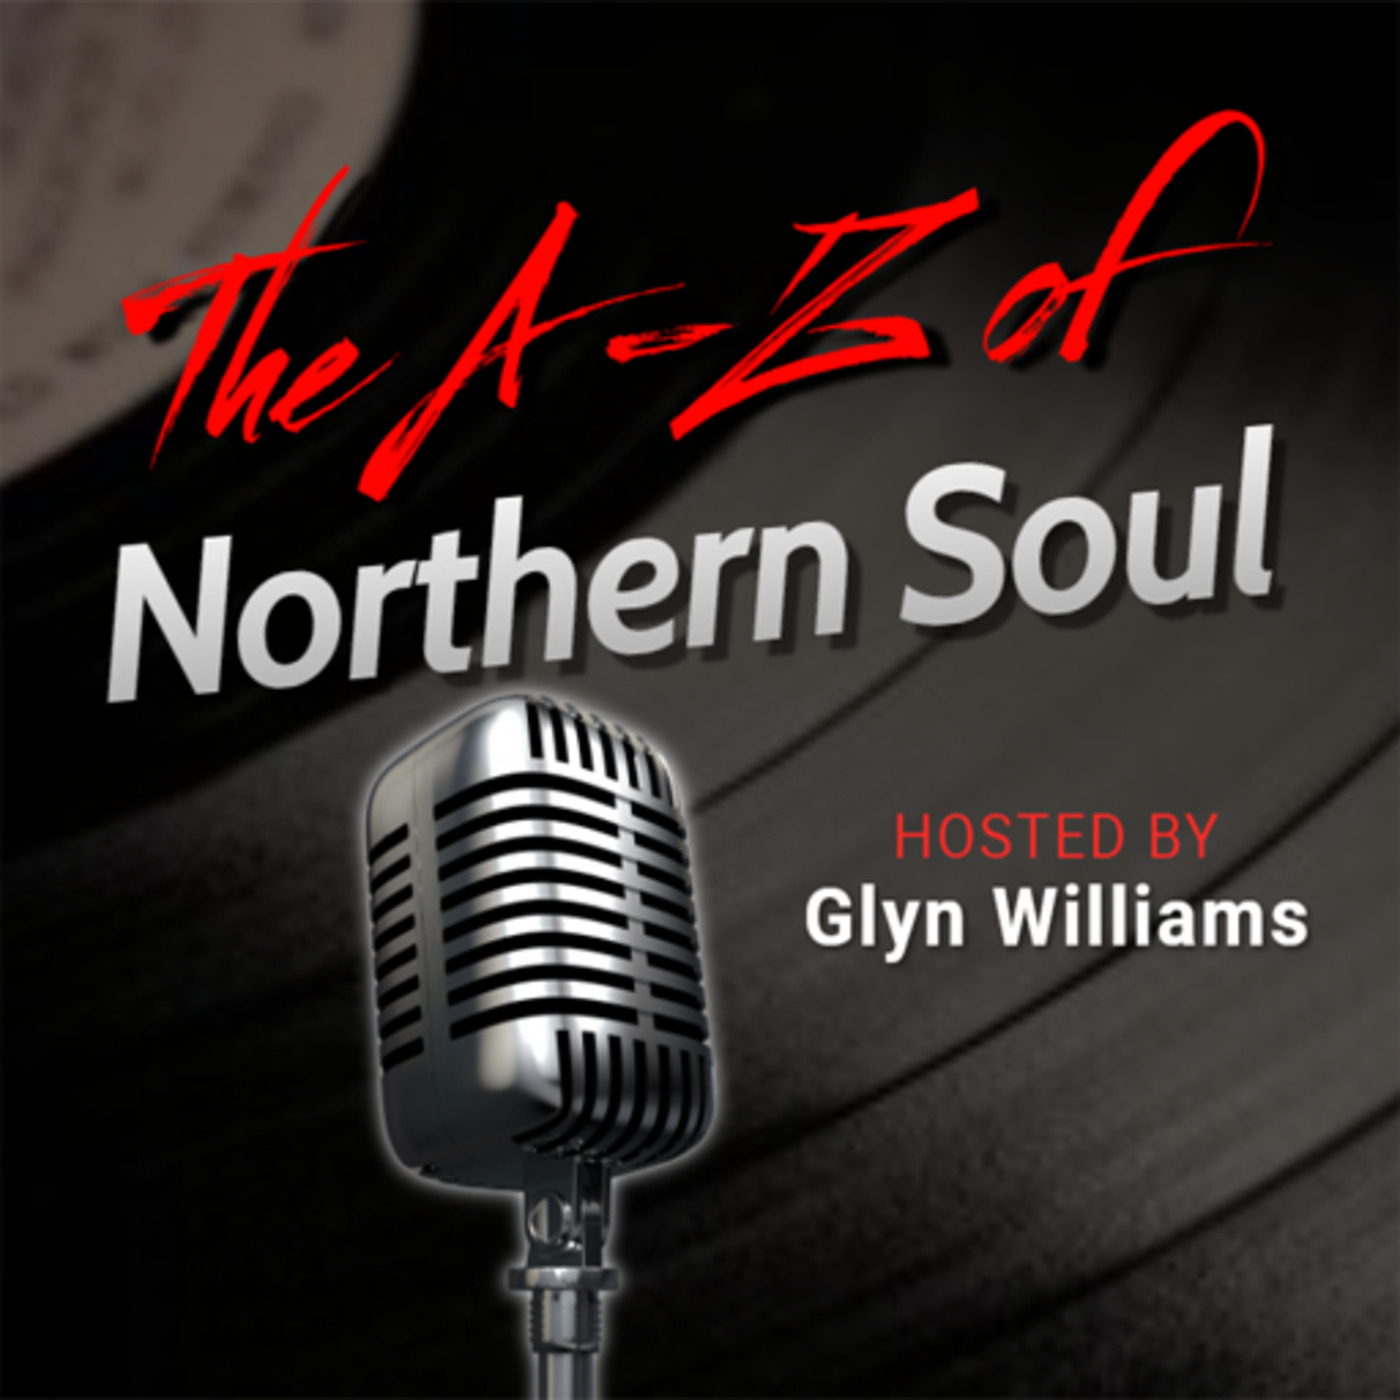 The A-Z of Northern Soul E025